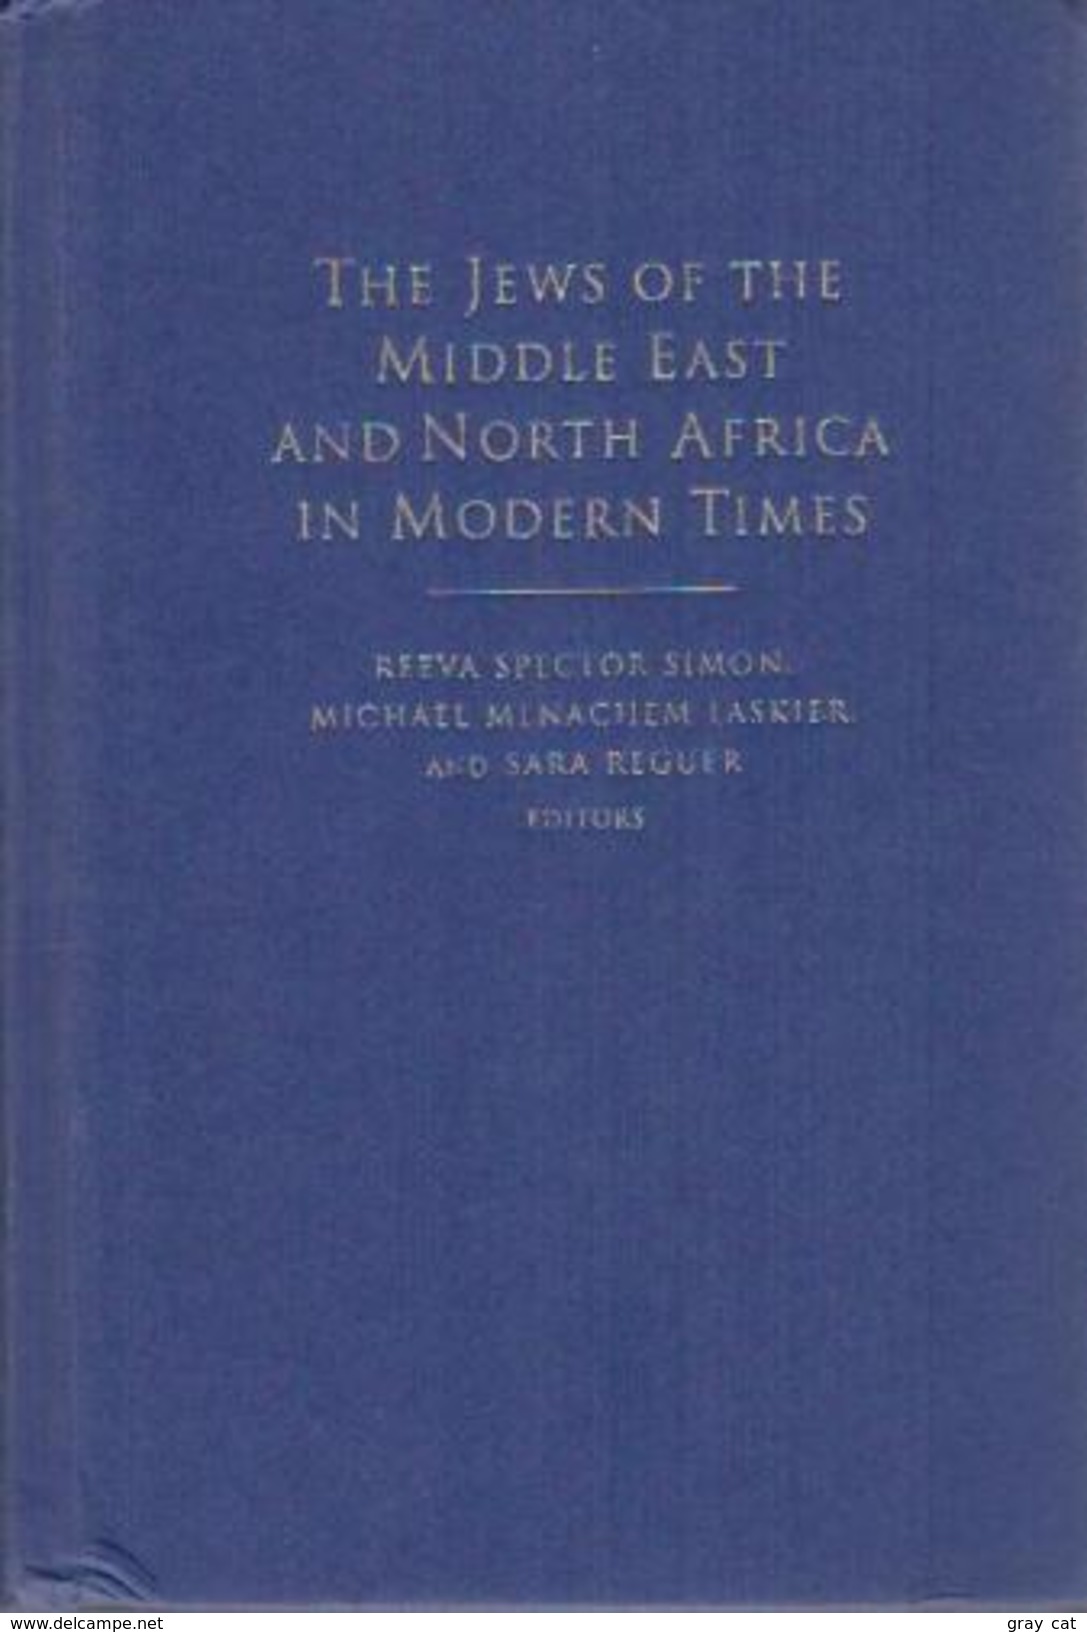 The Jews Of The Middle East And North Africa In Modern Times By Michael Menachem Laskier (ISBN 9780231107969) - Nahost